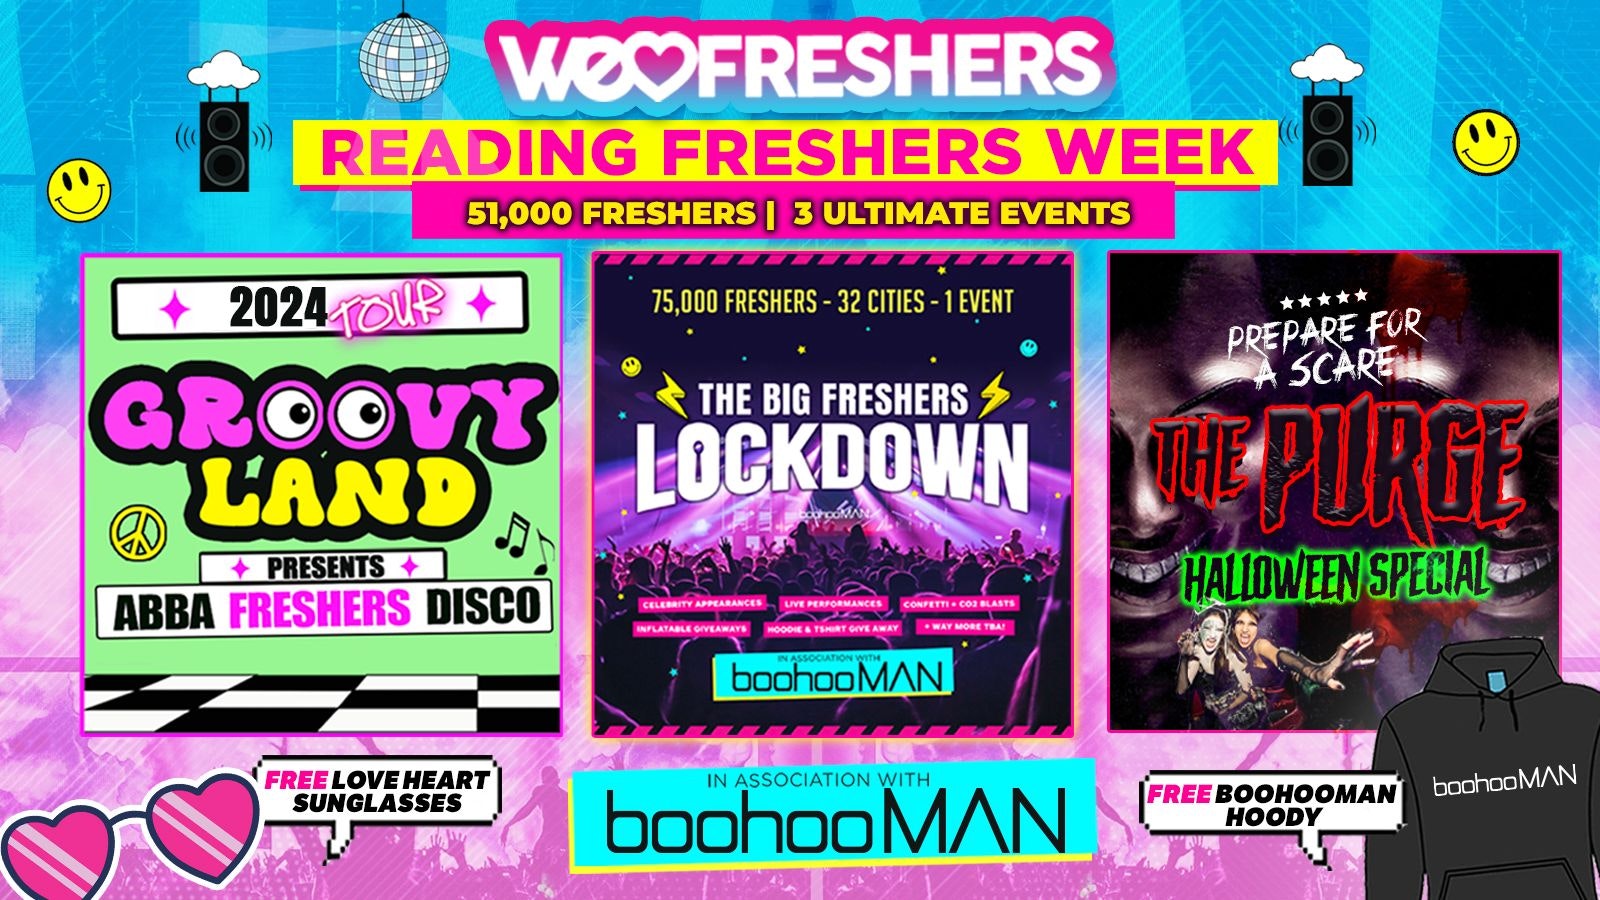 WE LOVE READING FRESHERS 2024 in association with boohooMAN ❗3 EVENTS ❗